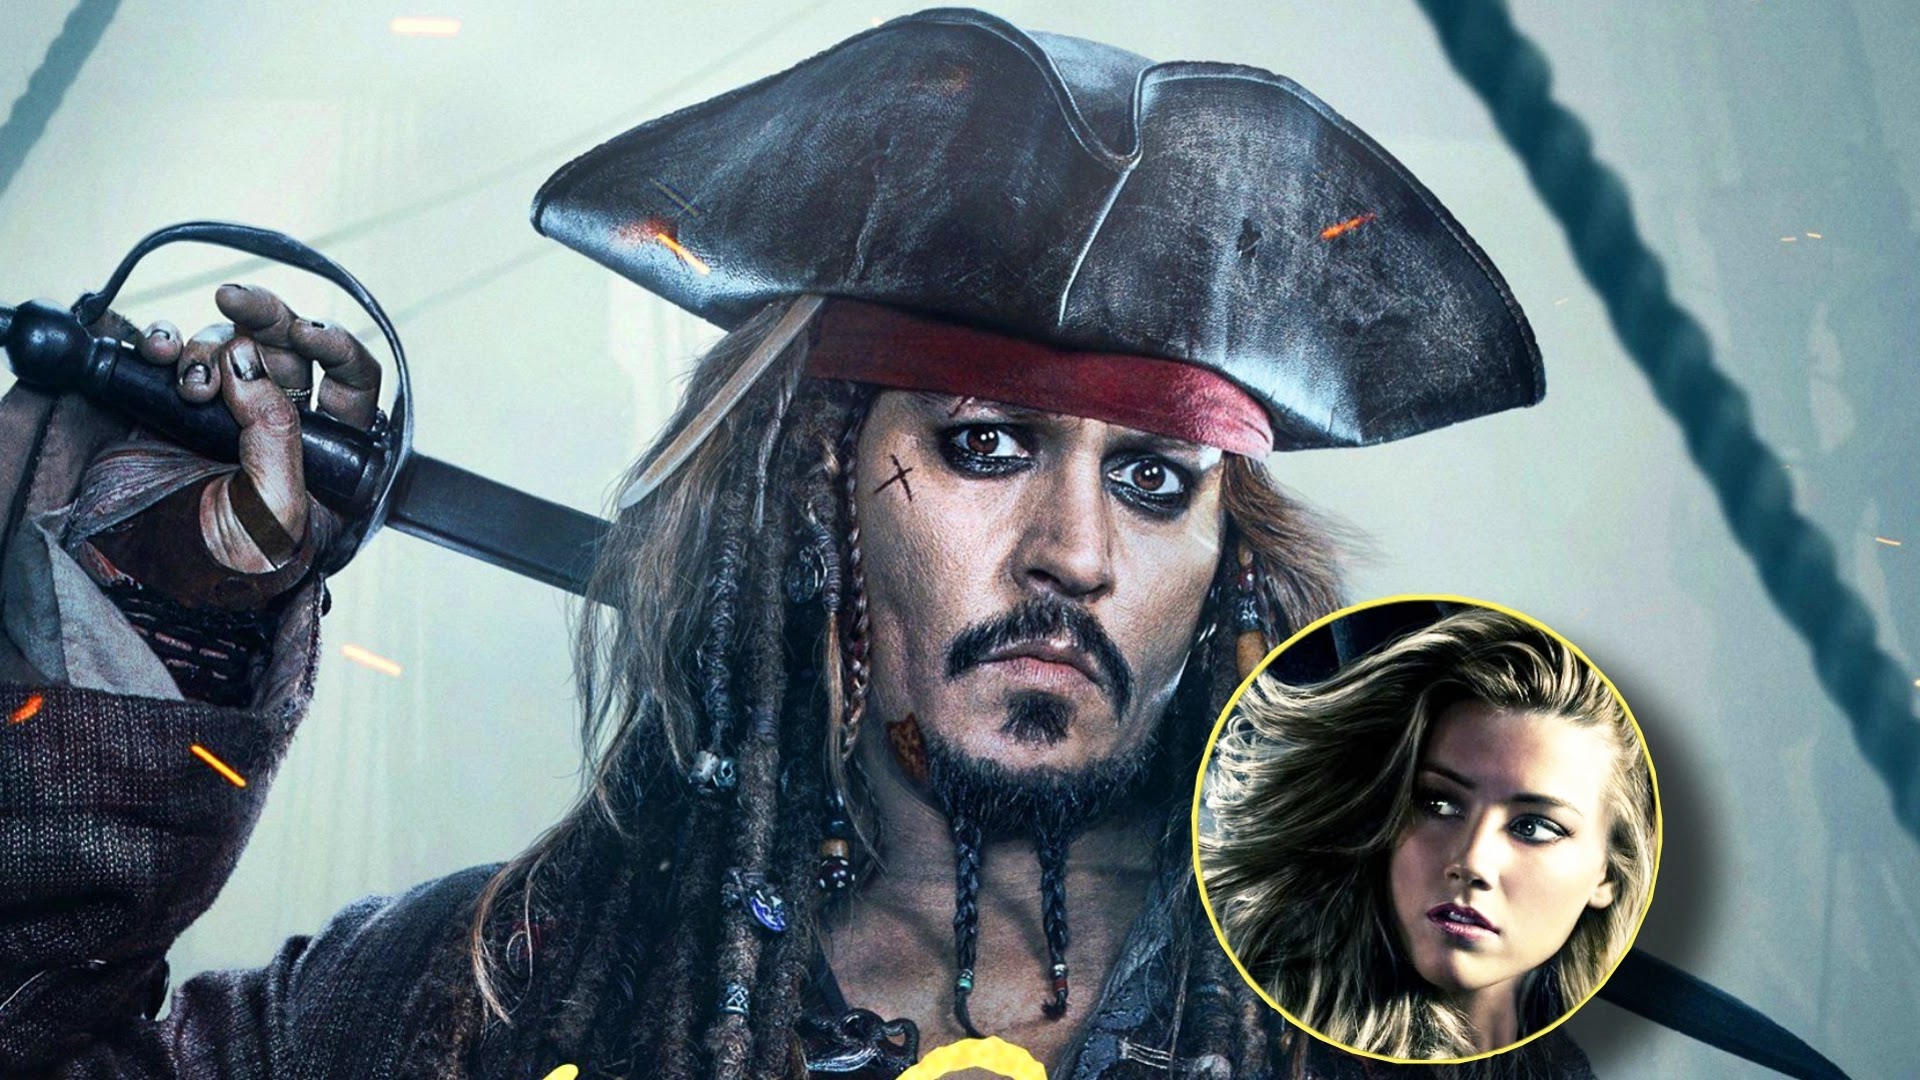 Pirates of the Caribbean 5: Dead Men Tell No Tales Johnny Depp Jack Sparrow Disney Drive Angry Amber Heard Piper Lee Summit Entertainment